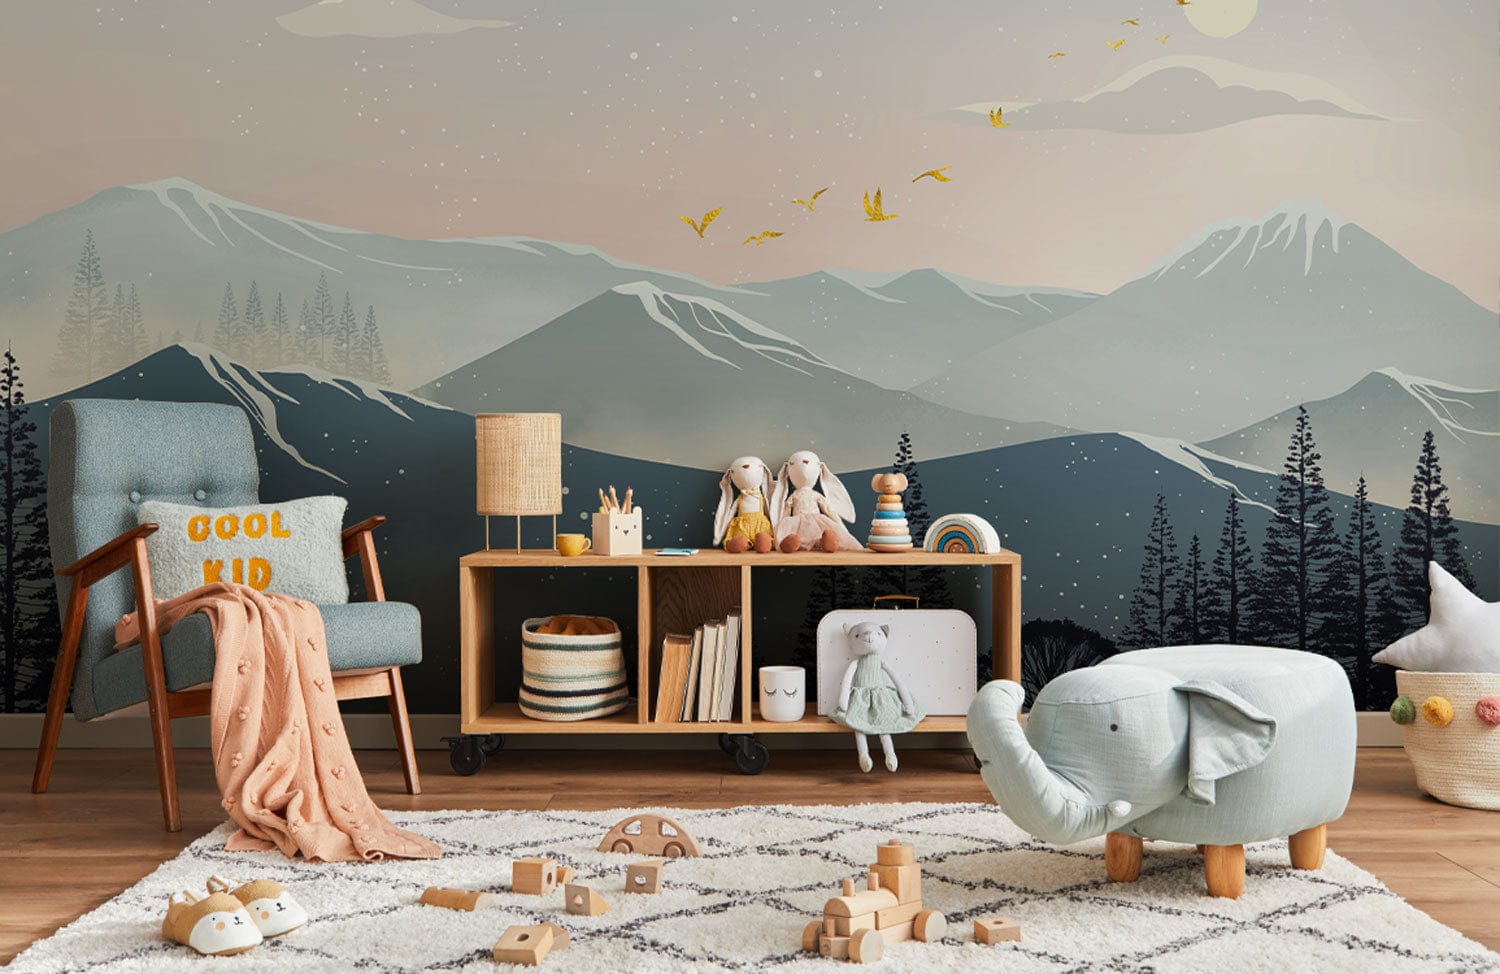 Wallpaper mural with a textured ombre mountain scene for use in decorating children's bedrooms